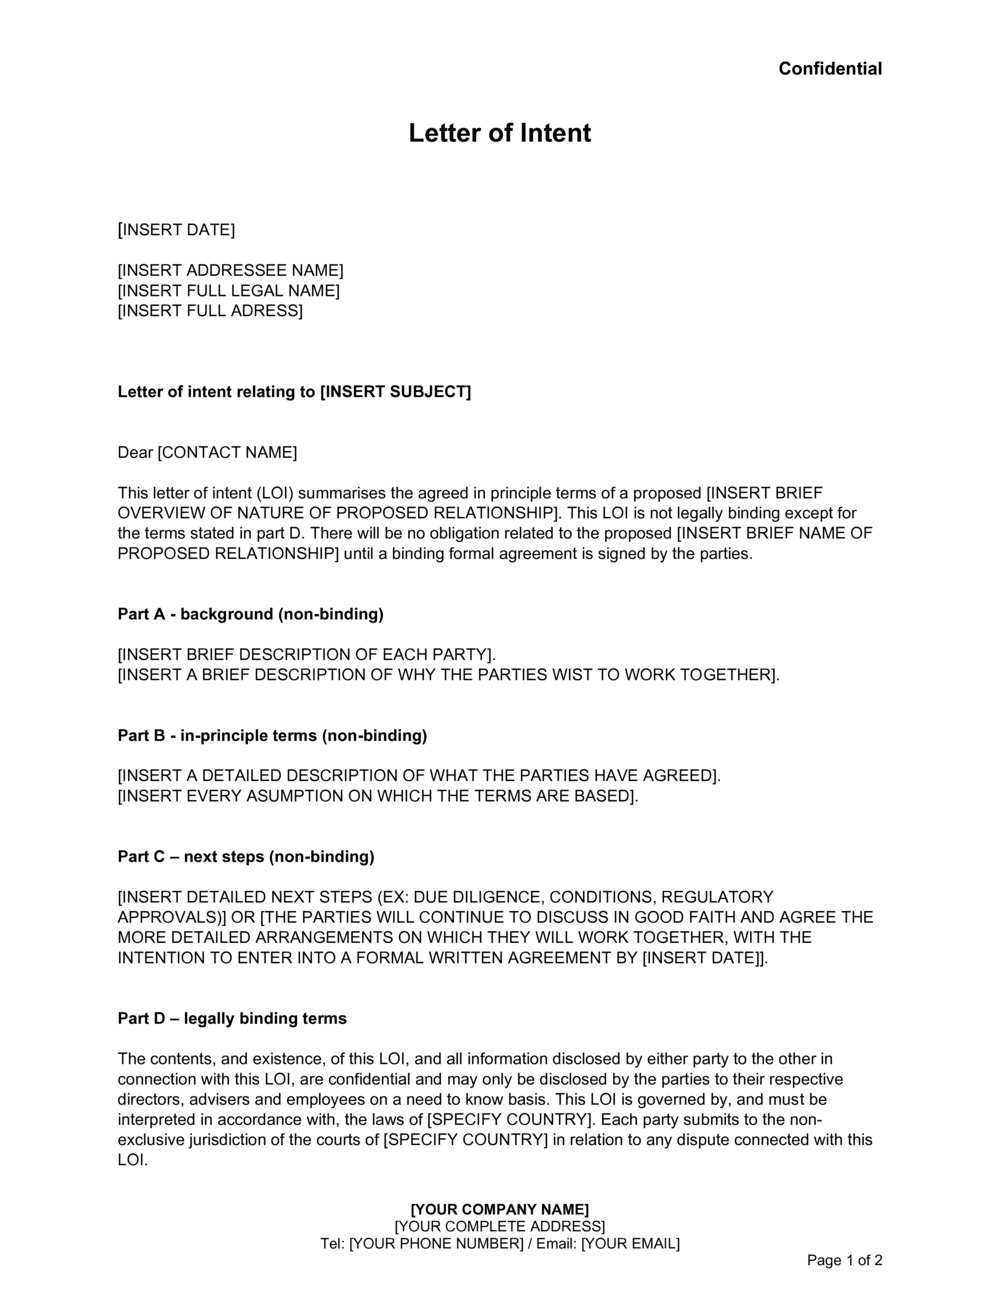 Sample Letter Of Intent For Business from templates.business-in-a-box.com